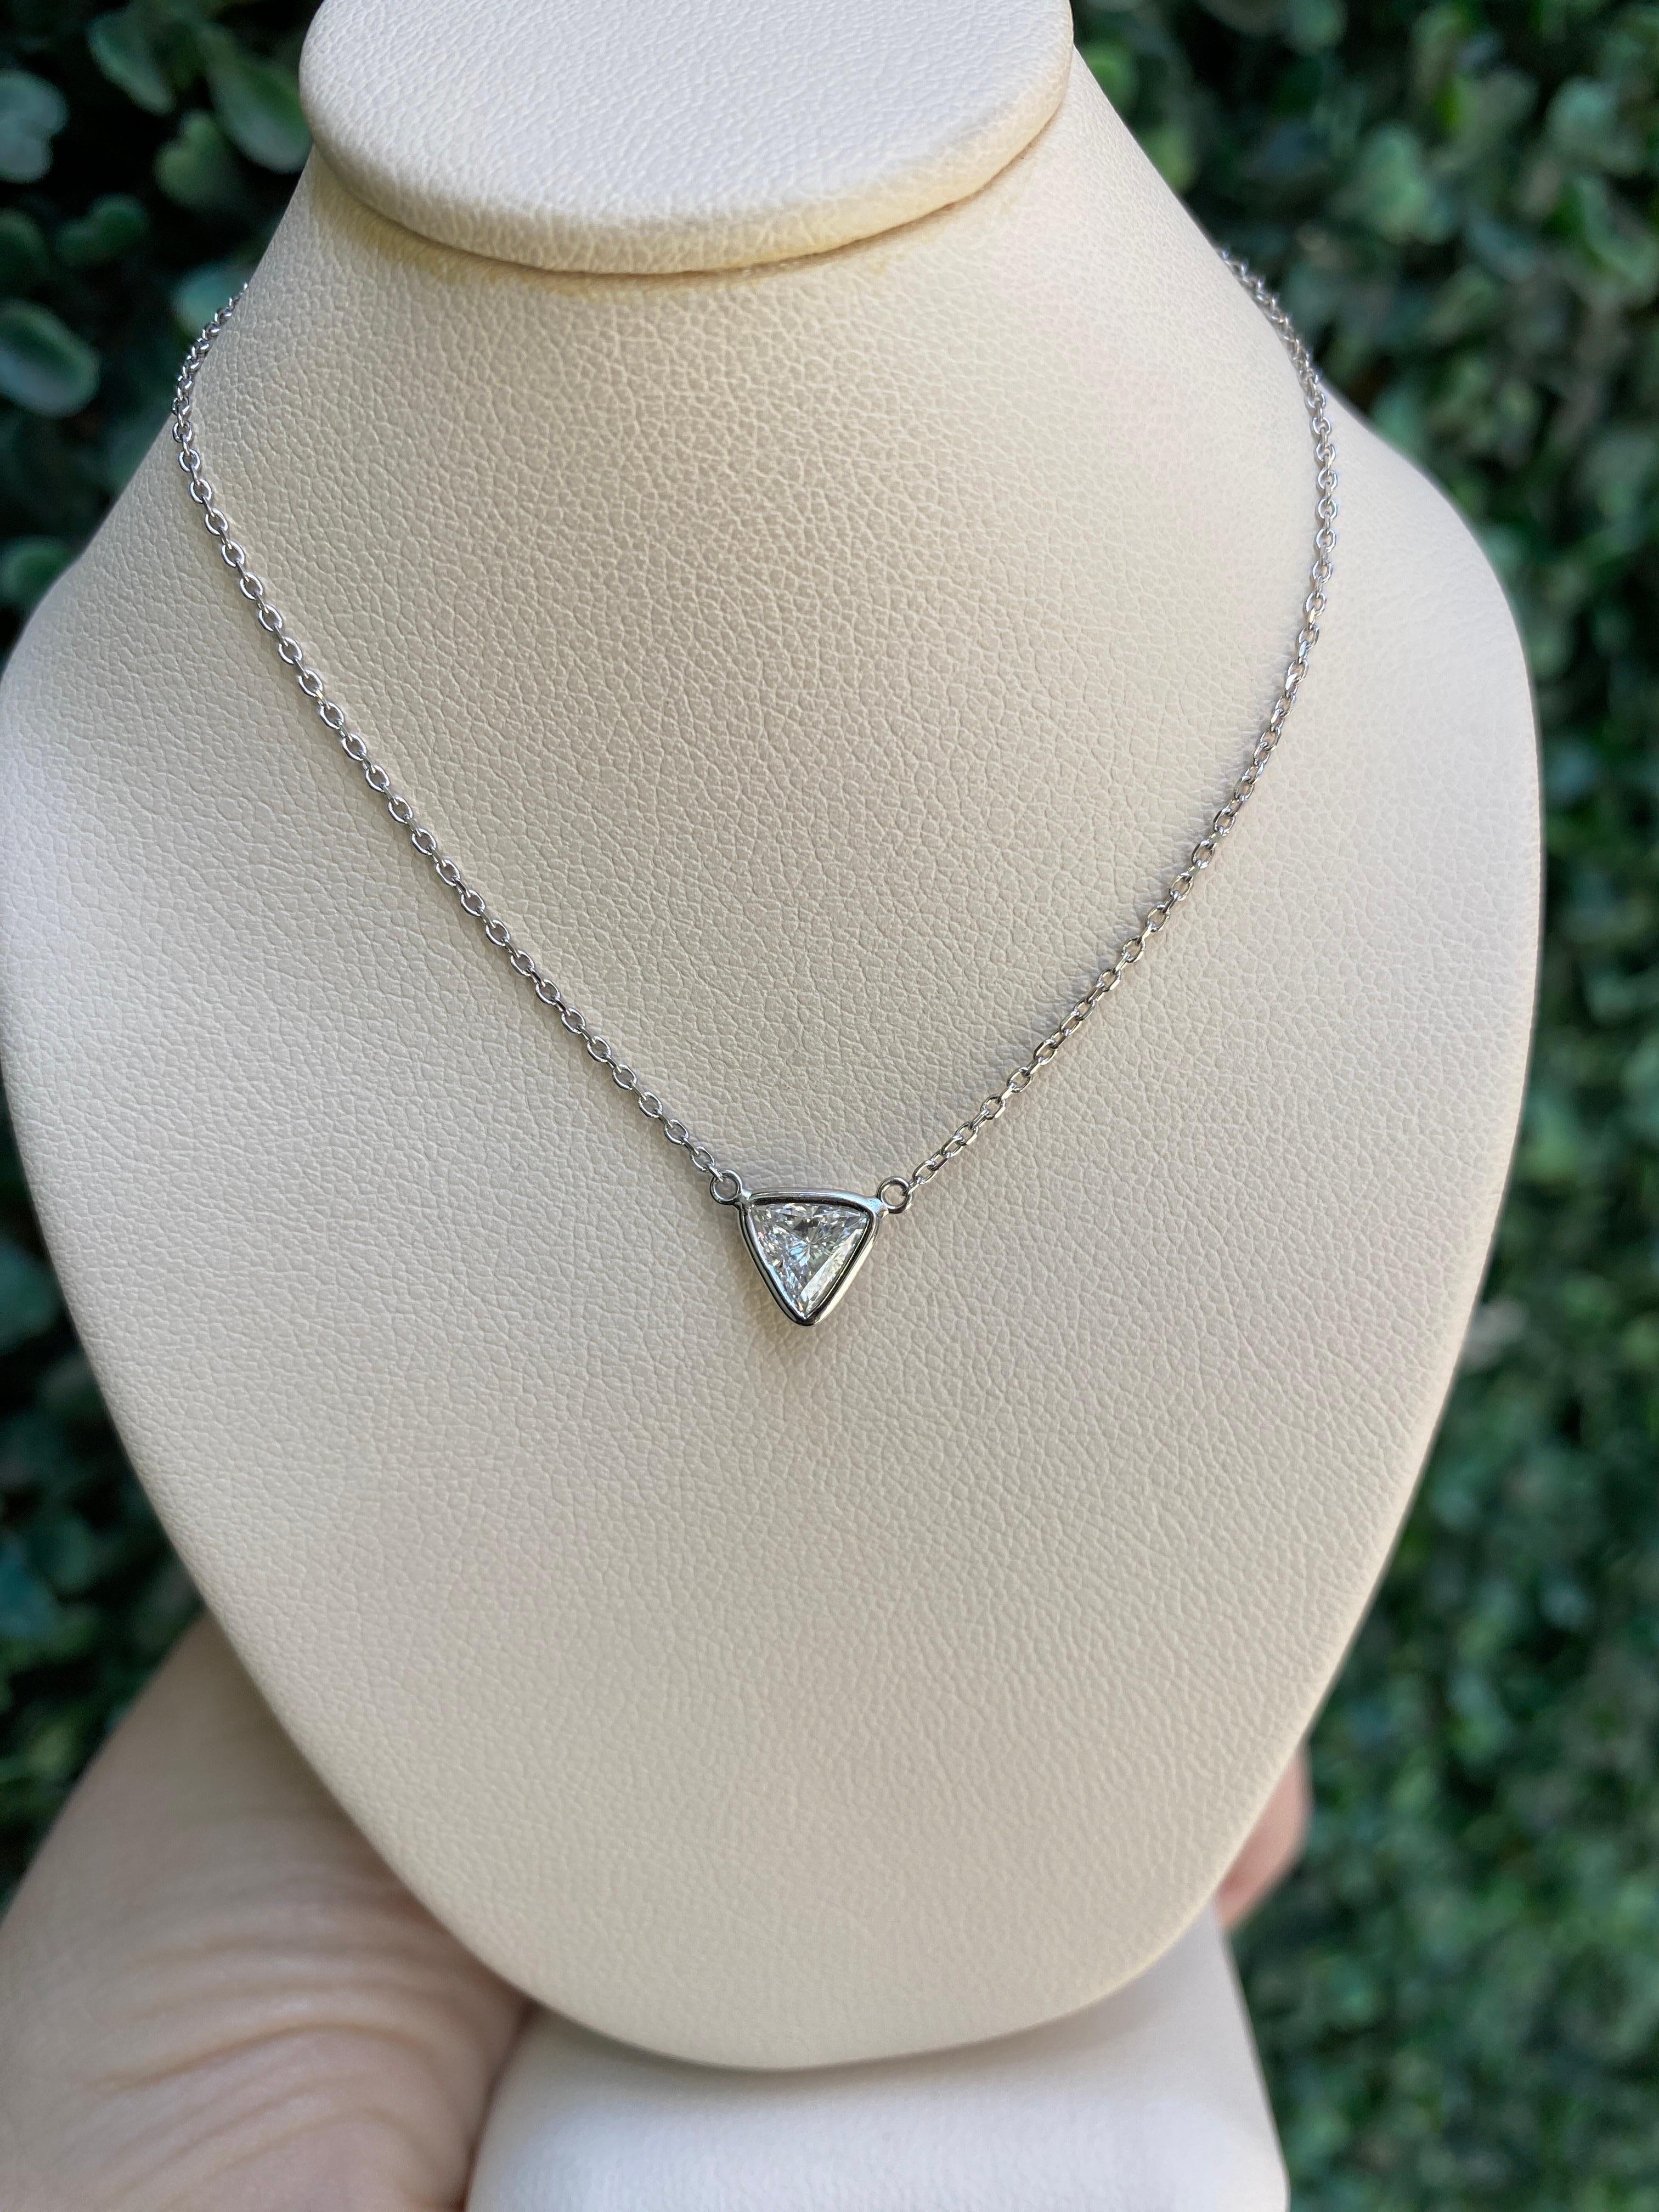 0.46 Carat Natural Trillion Cut Diamond Pendant Necklace, 14k White Gold In New Condition For Sale In Houston, TX